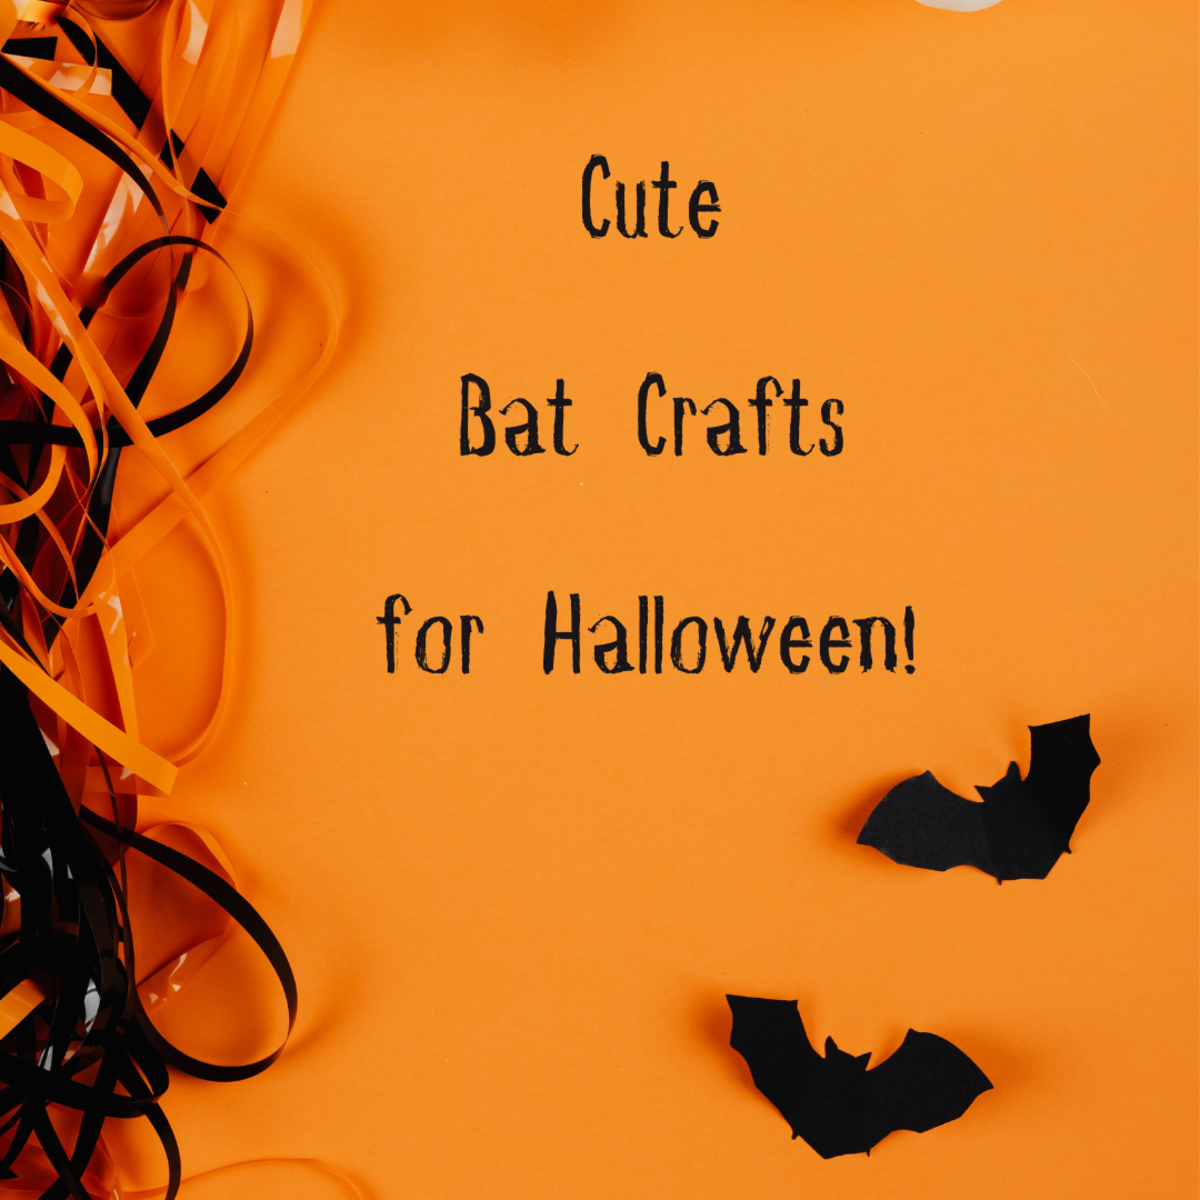 Get ready for Halloween with some adorable bat crafts!